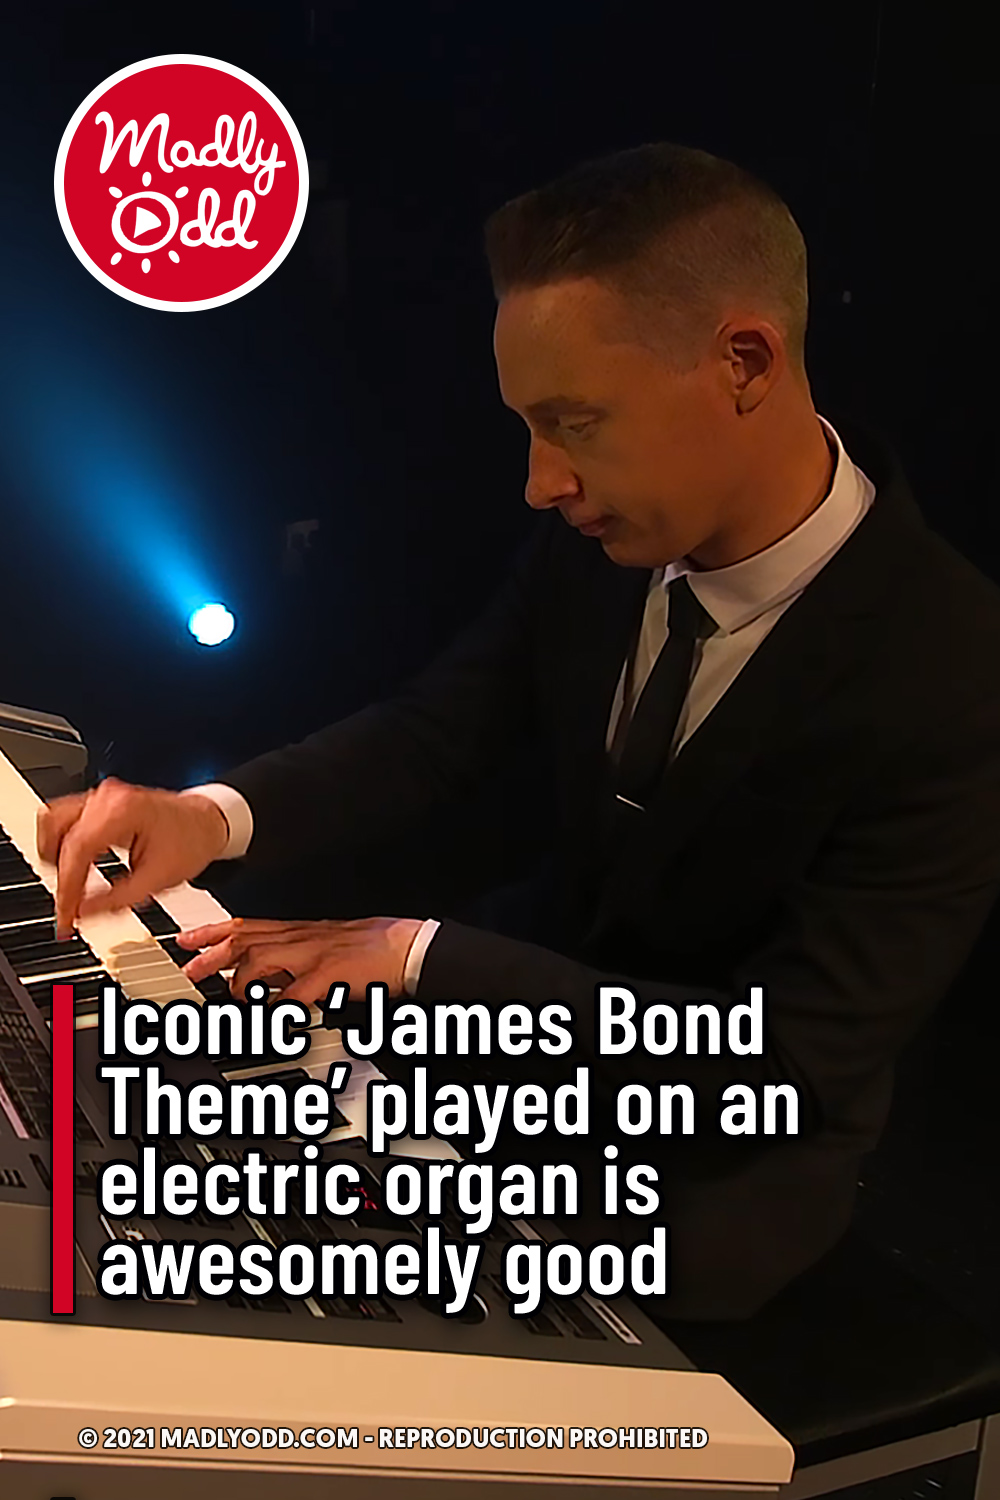 Iconic ‘James Bond Theme’ played on an electric organ is awesomely good